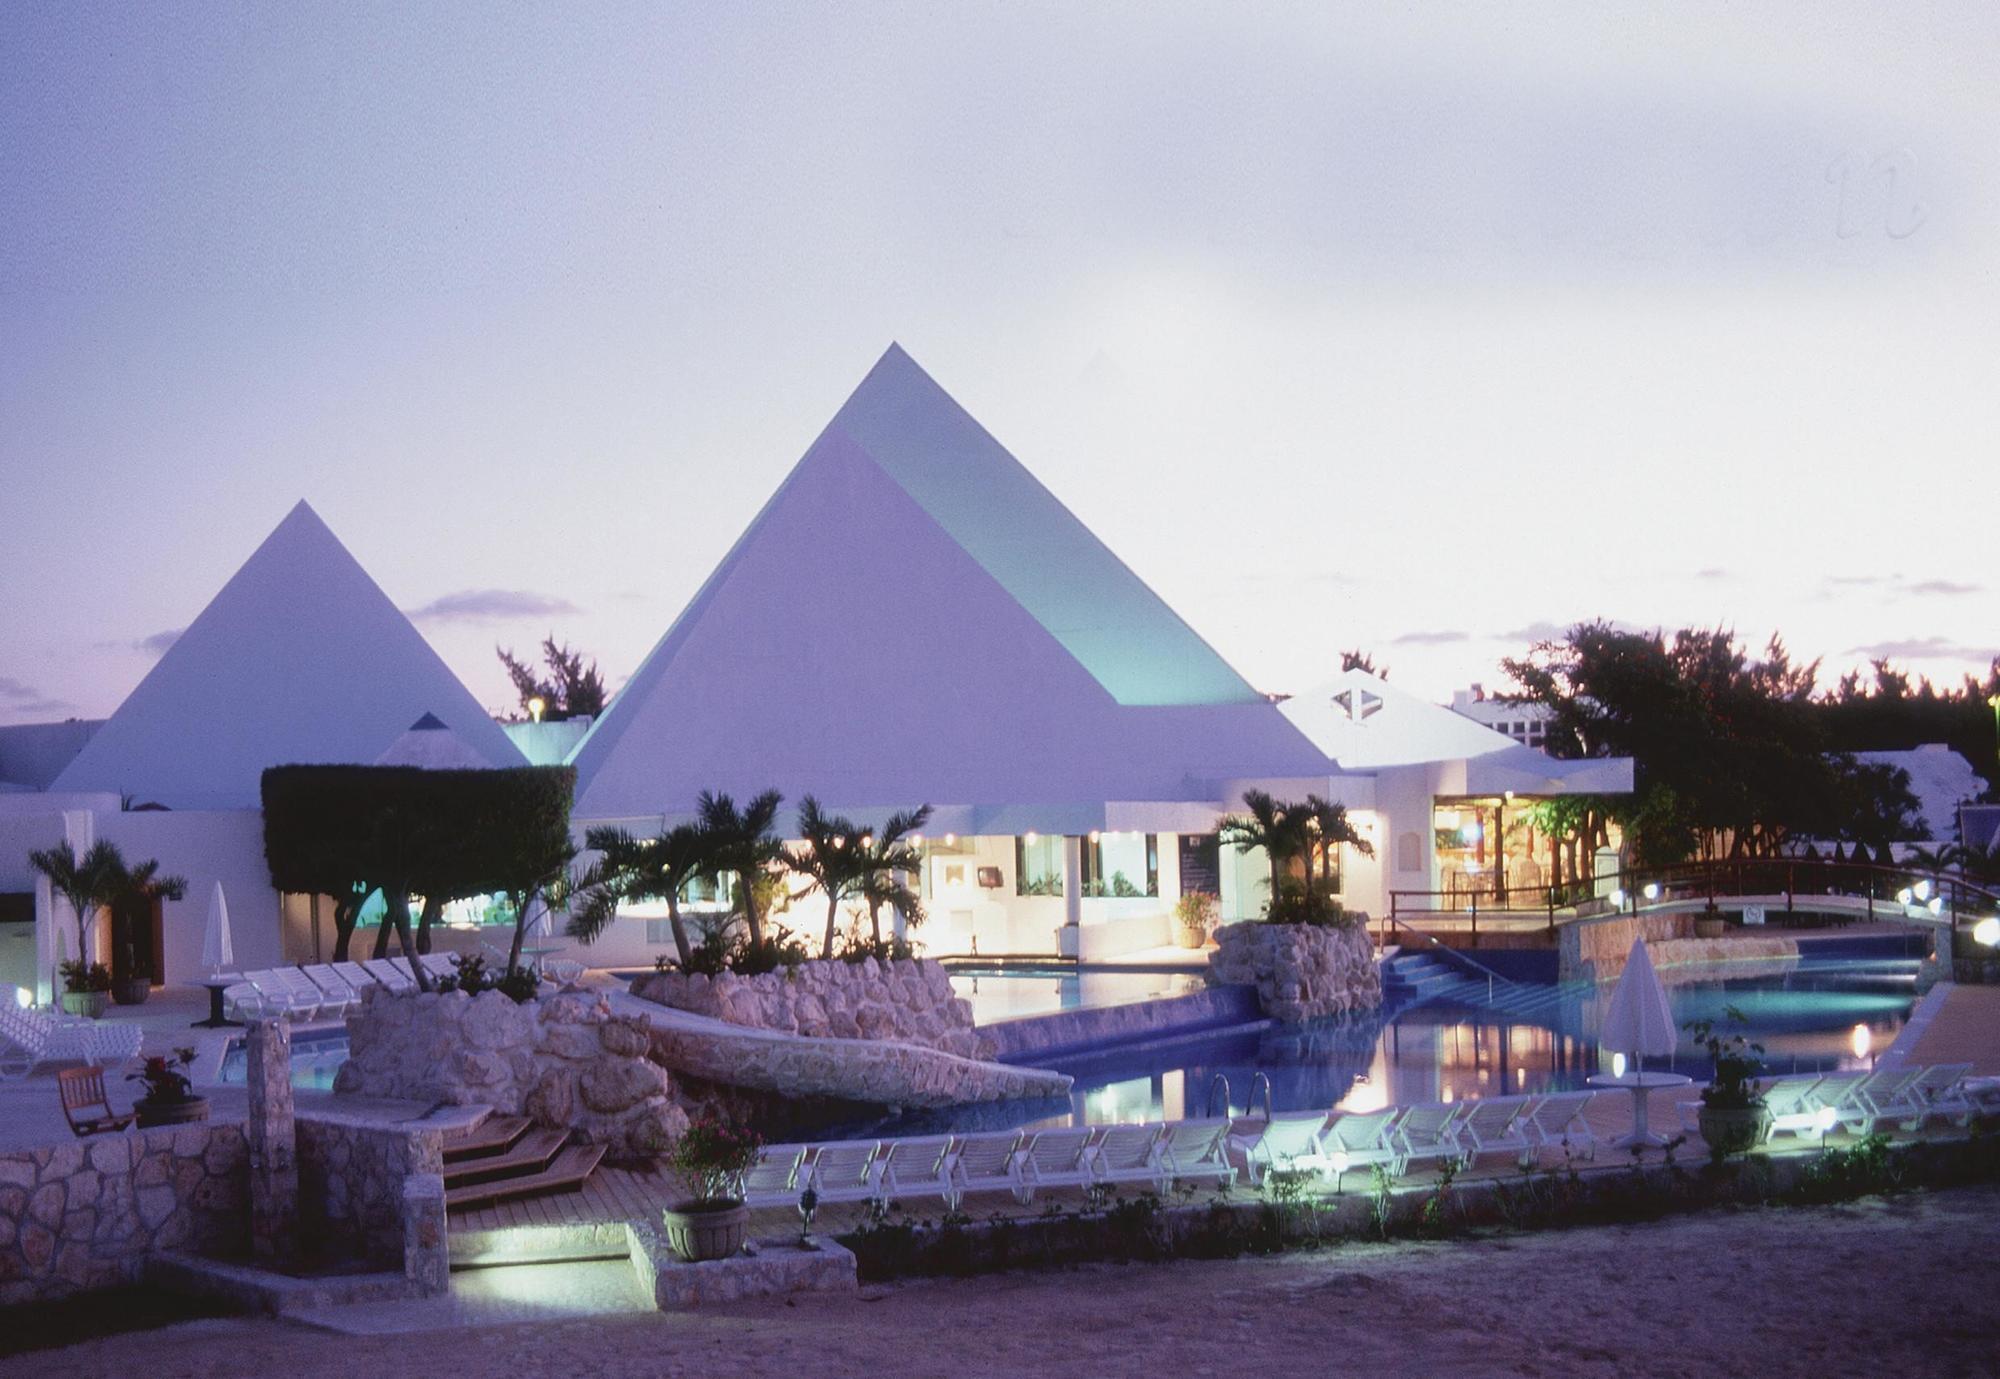 HOTEL SUNSET MARINA & YACHT CLUB CANCUN 4* (Mexico) - from US$ 236 | BOOKED